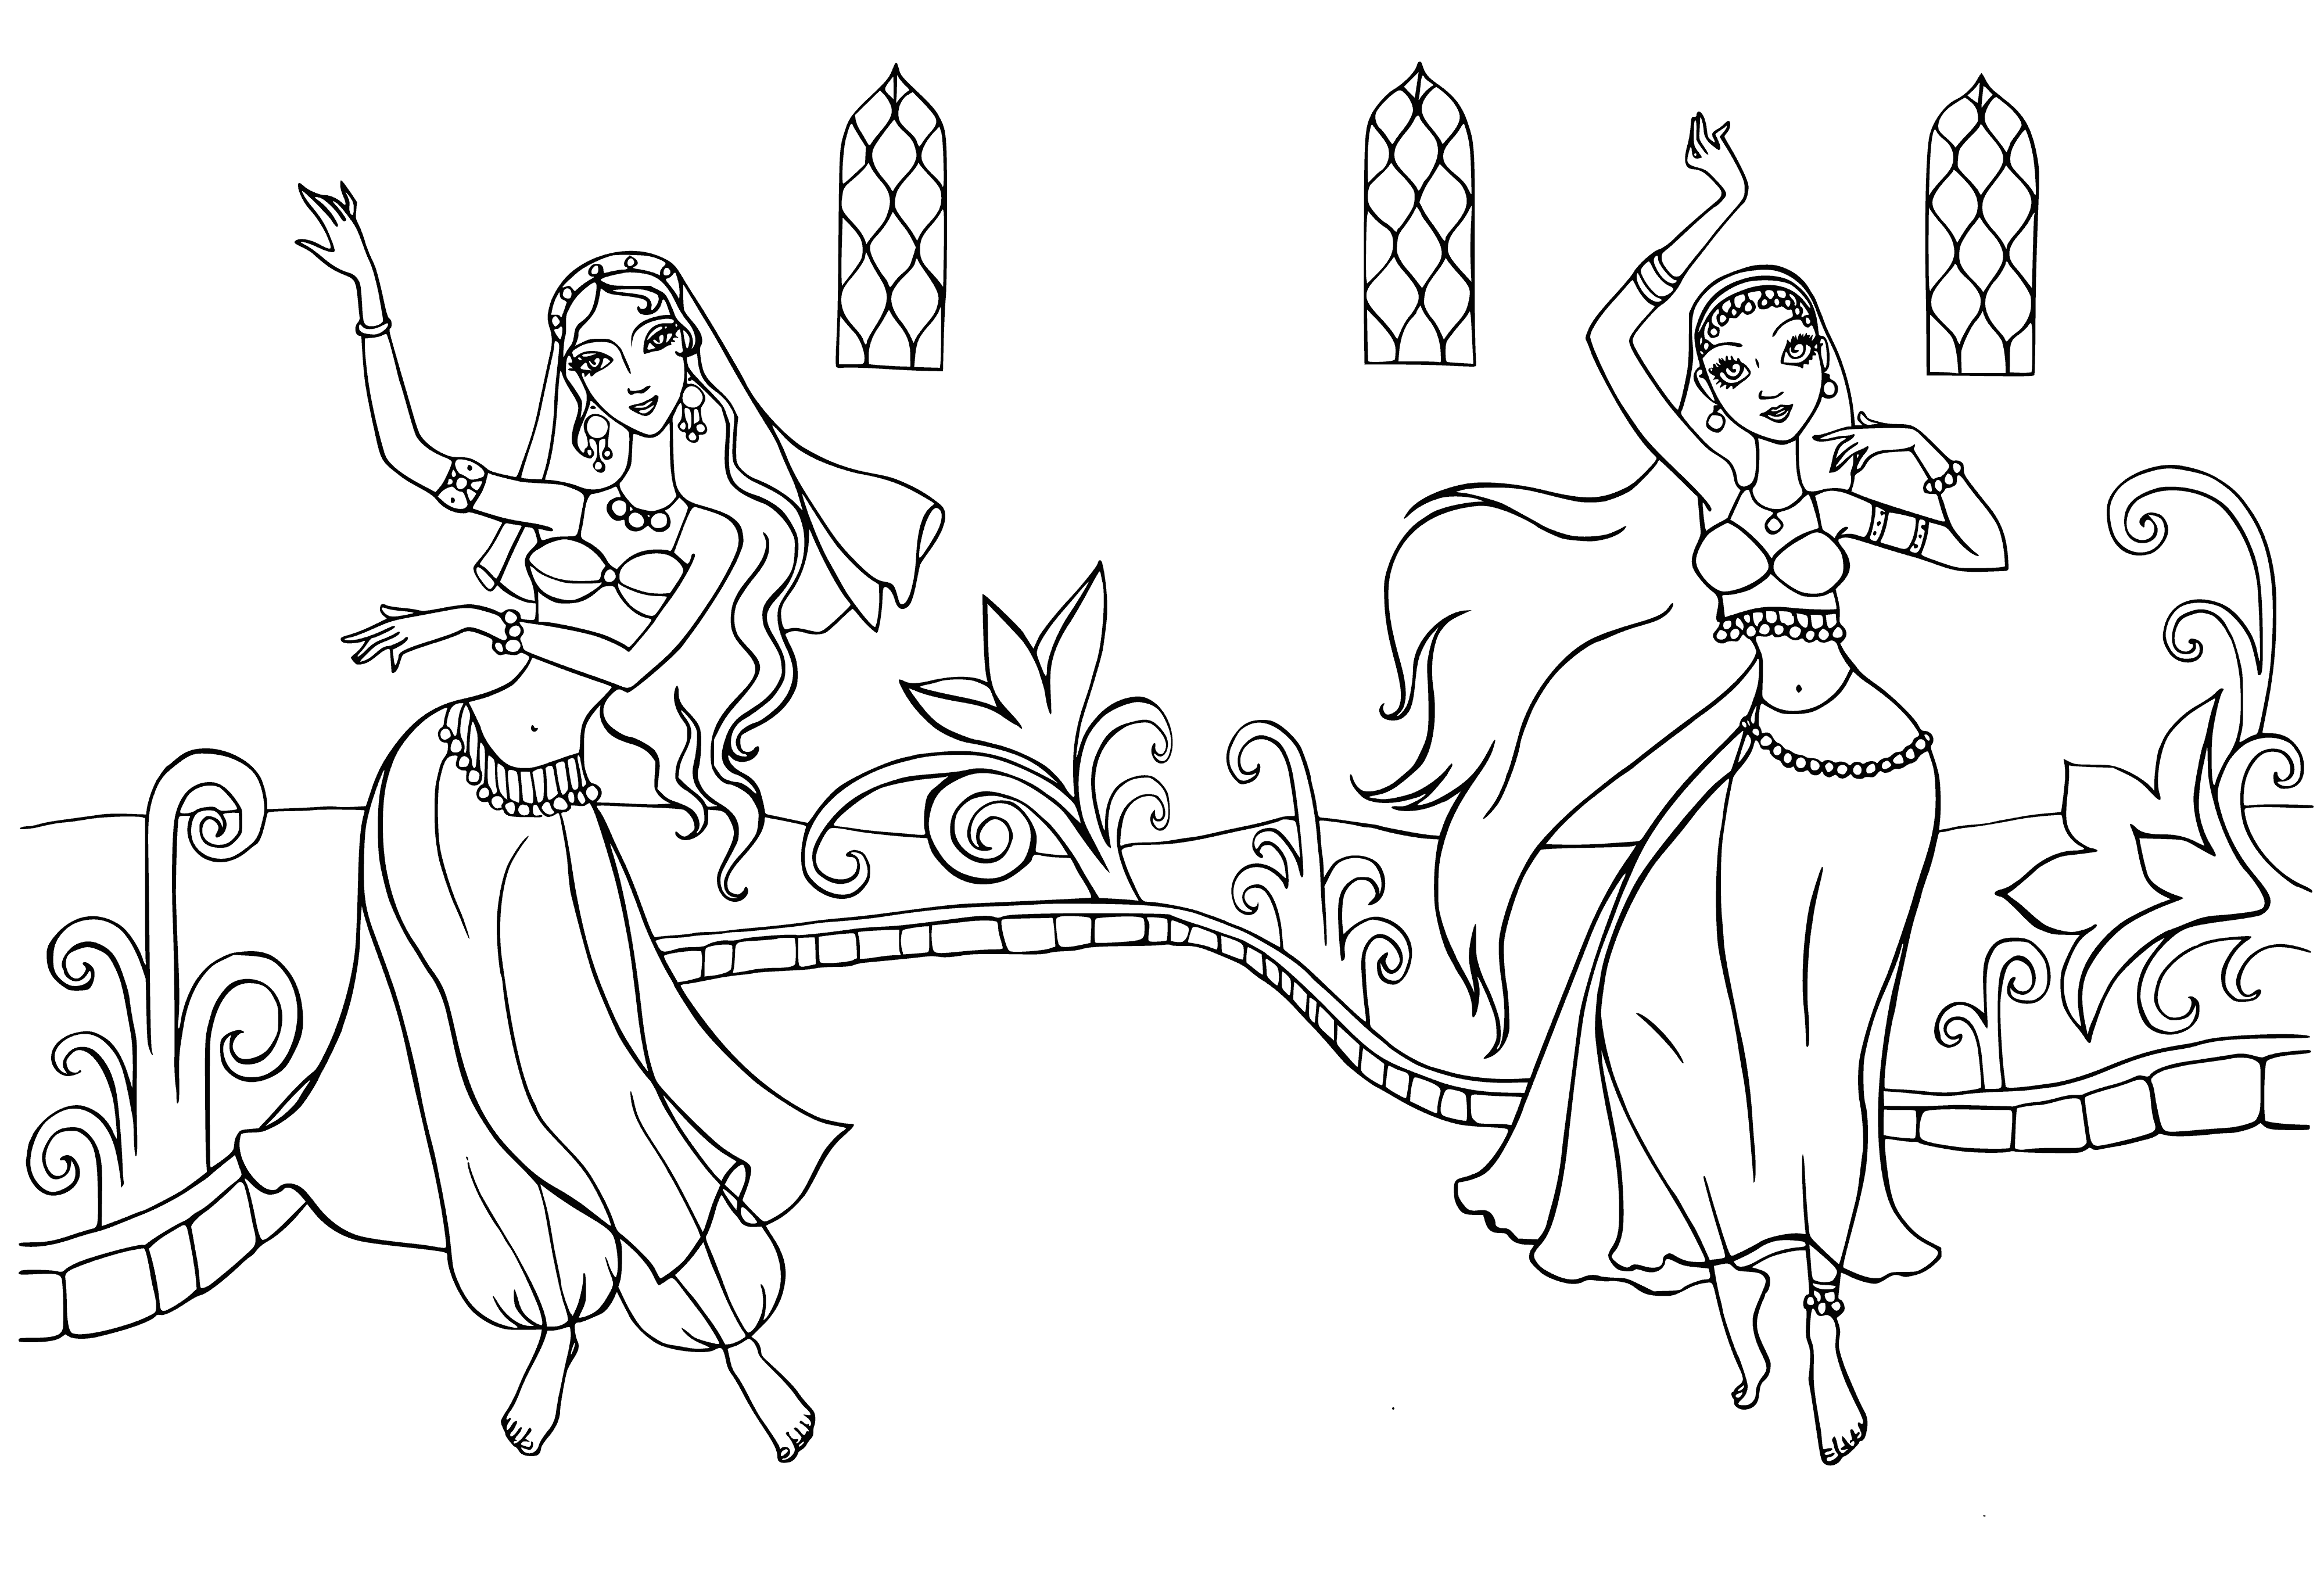 coloring page: Fairy kingdom East Dance is a peaceful place with a big castle, lots of trees, and fairies flying & sitting on flowers.